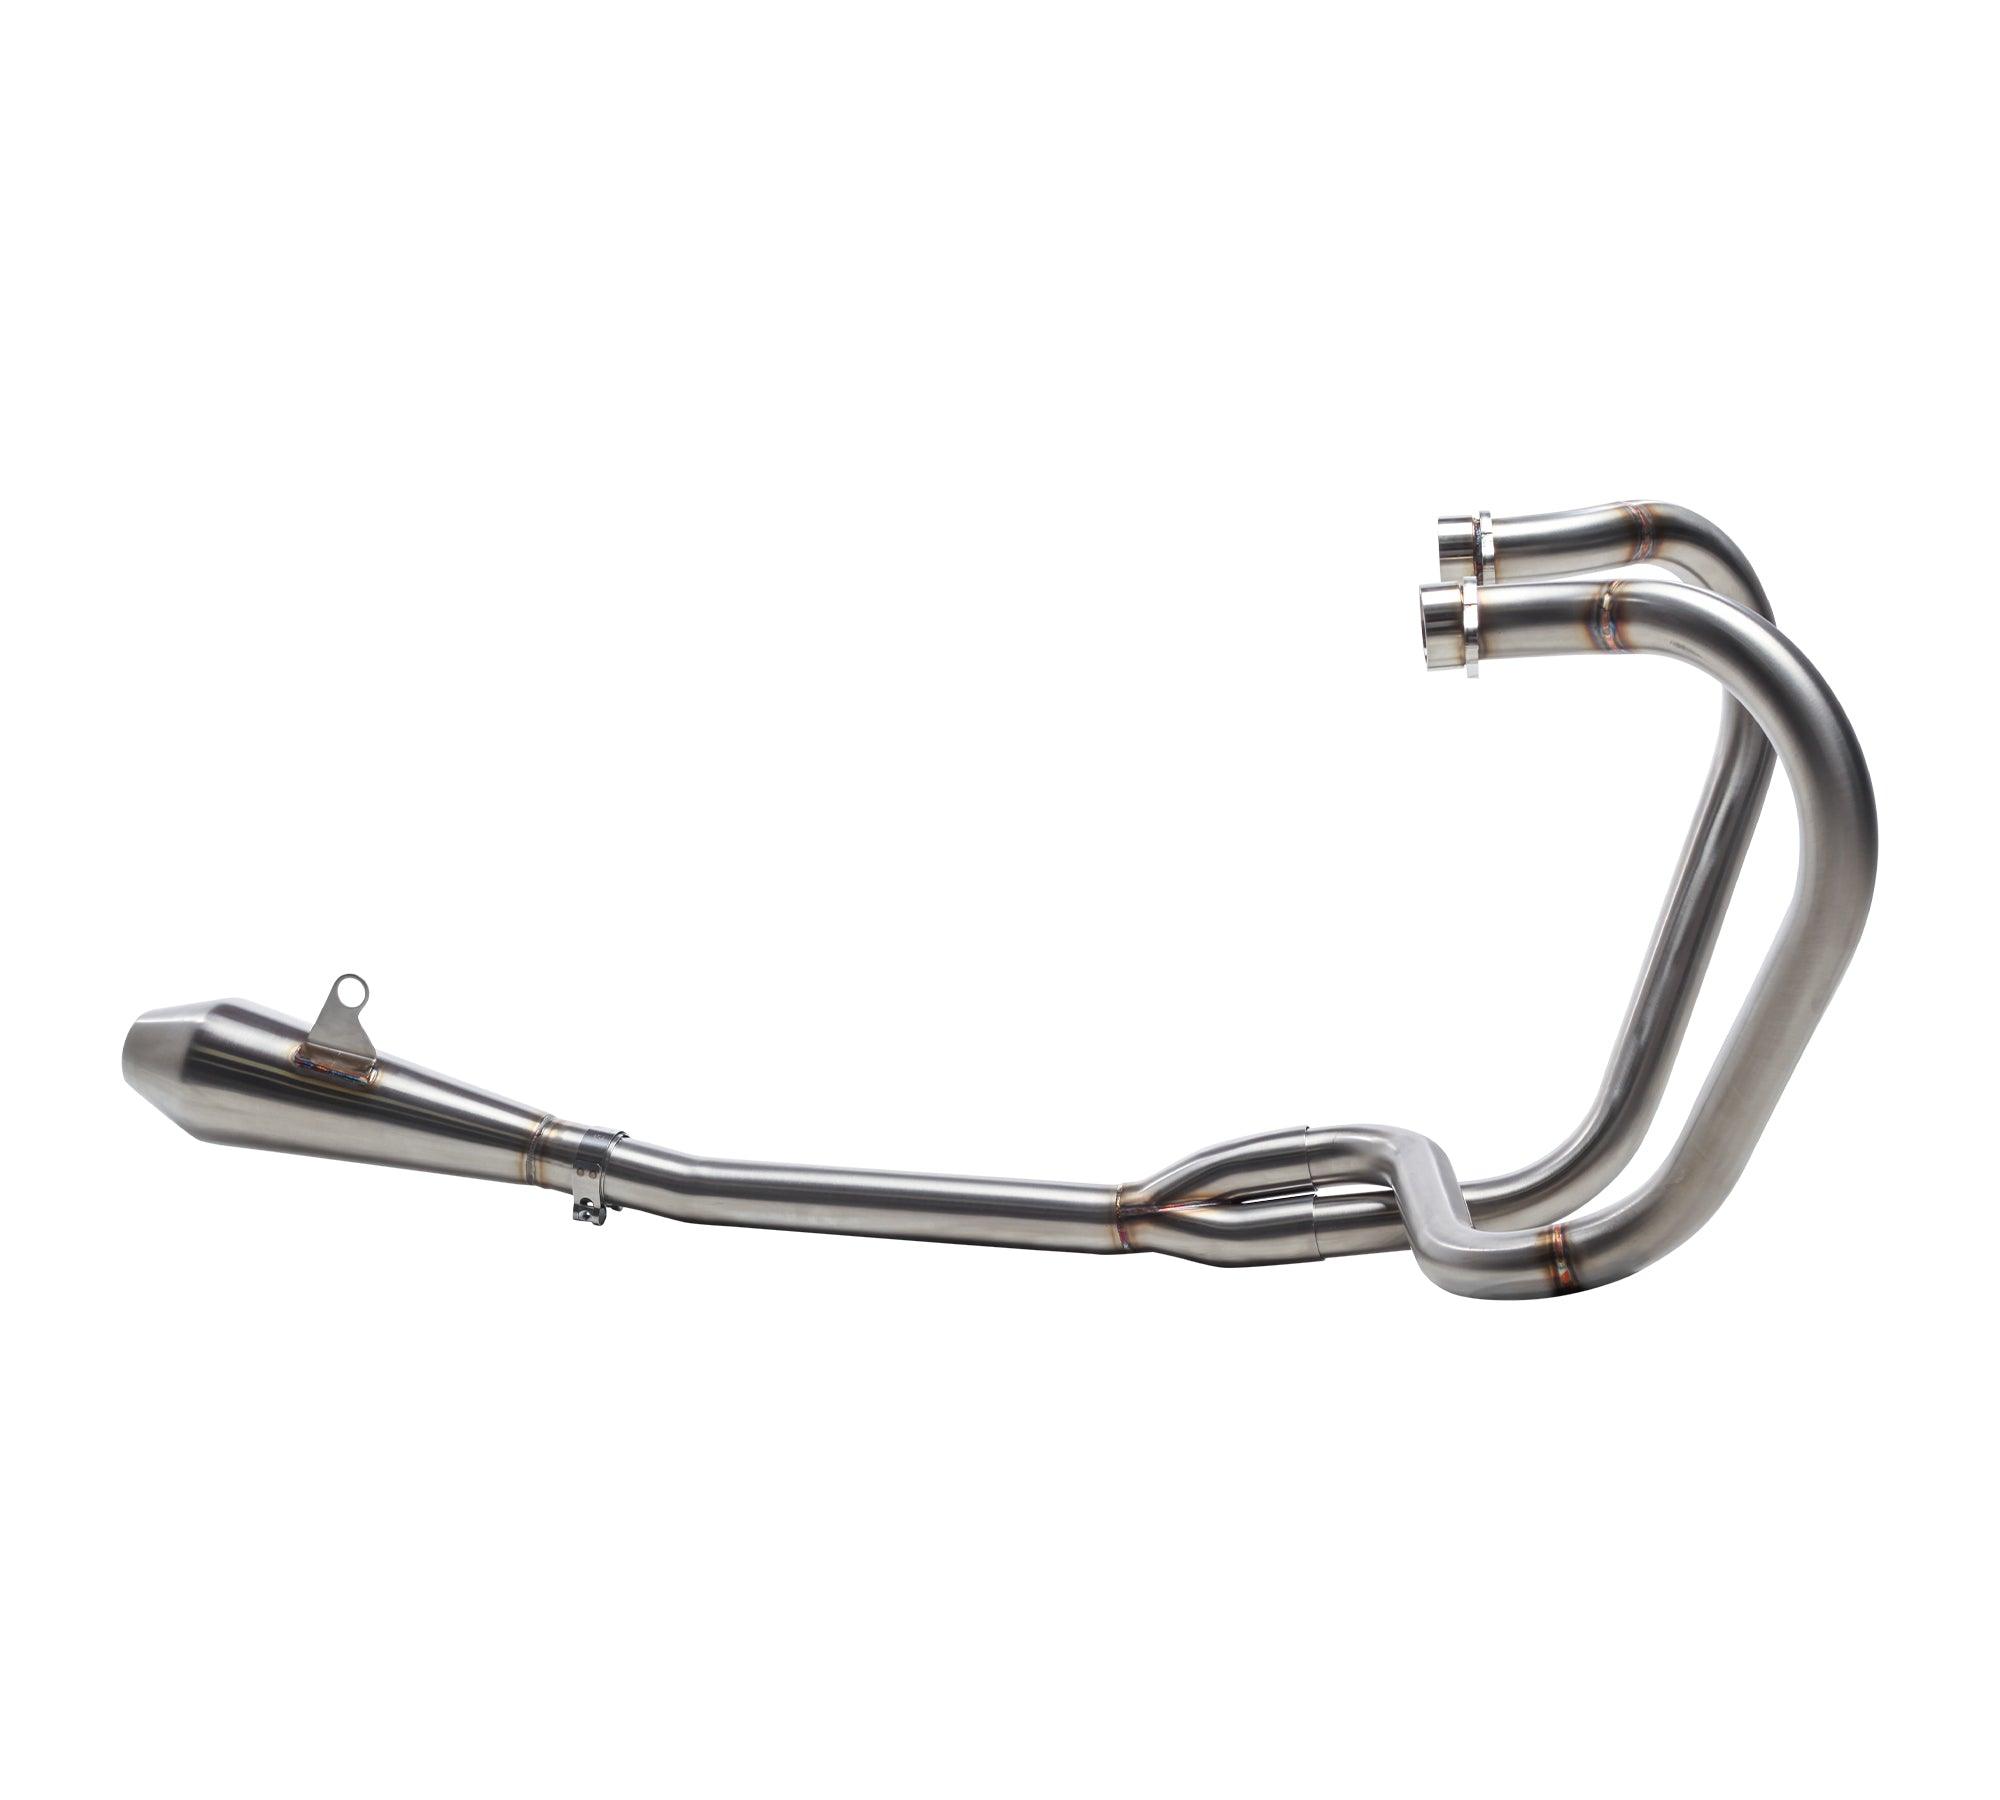 Full System Motorcycle Exhaust